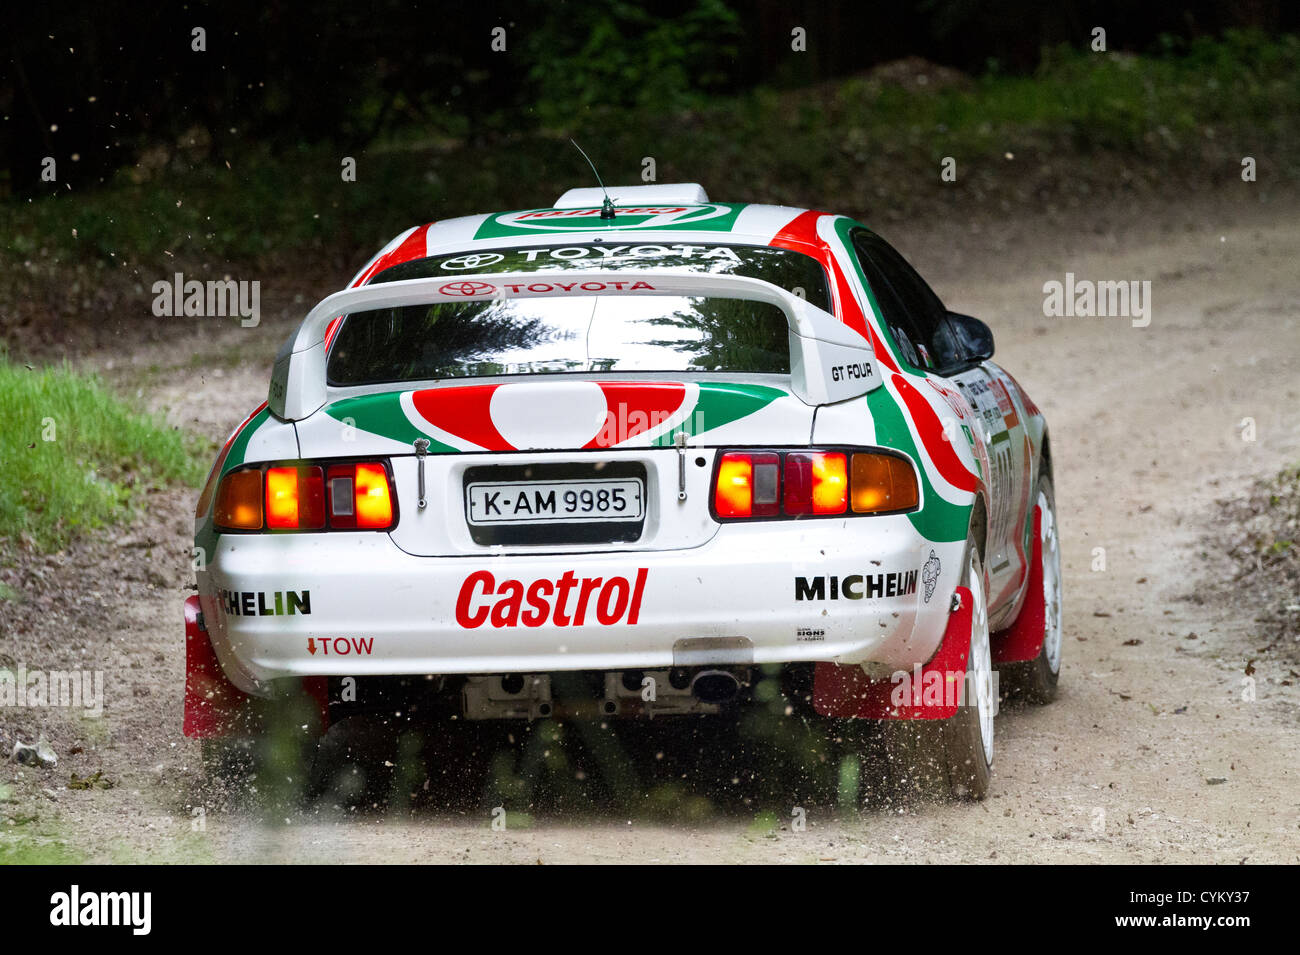 Toyota celica gt four st205 hi-res stock photography and images - Alamy